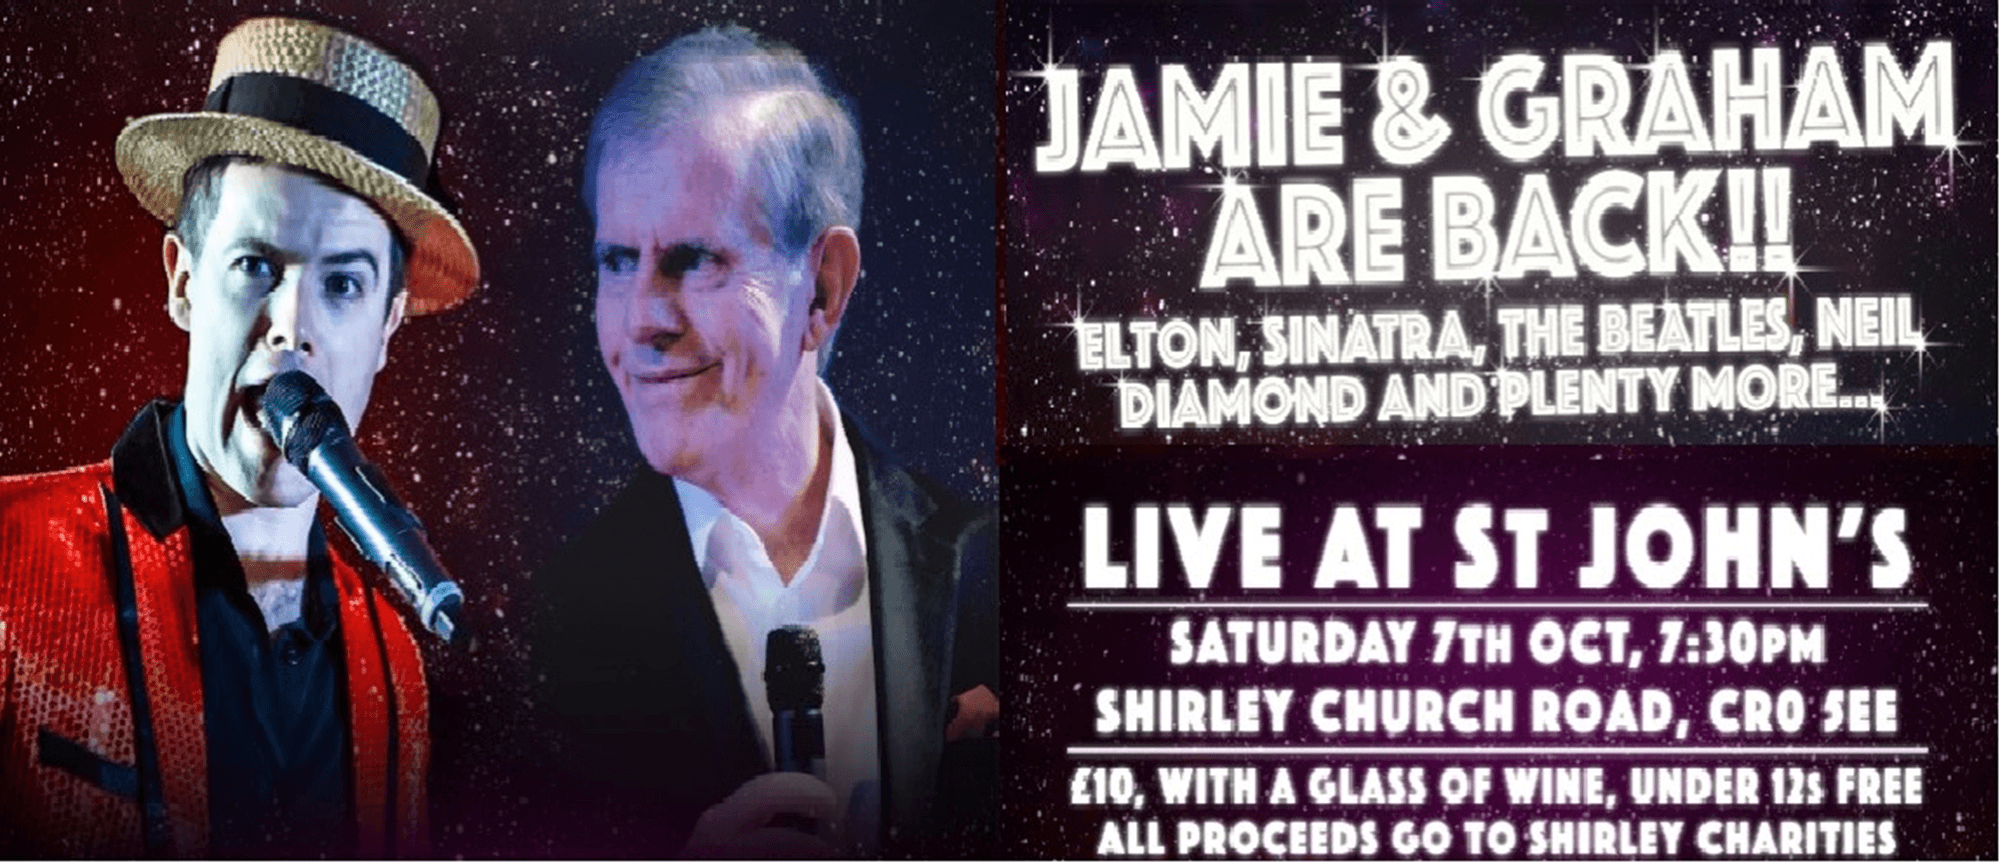 Poster of Jamie & Graham.  Live at St Johns 7th October at 7:30